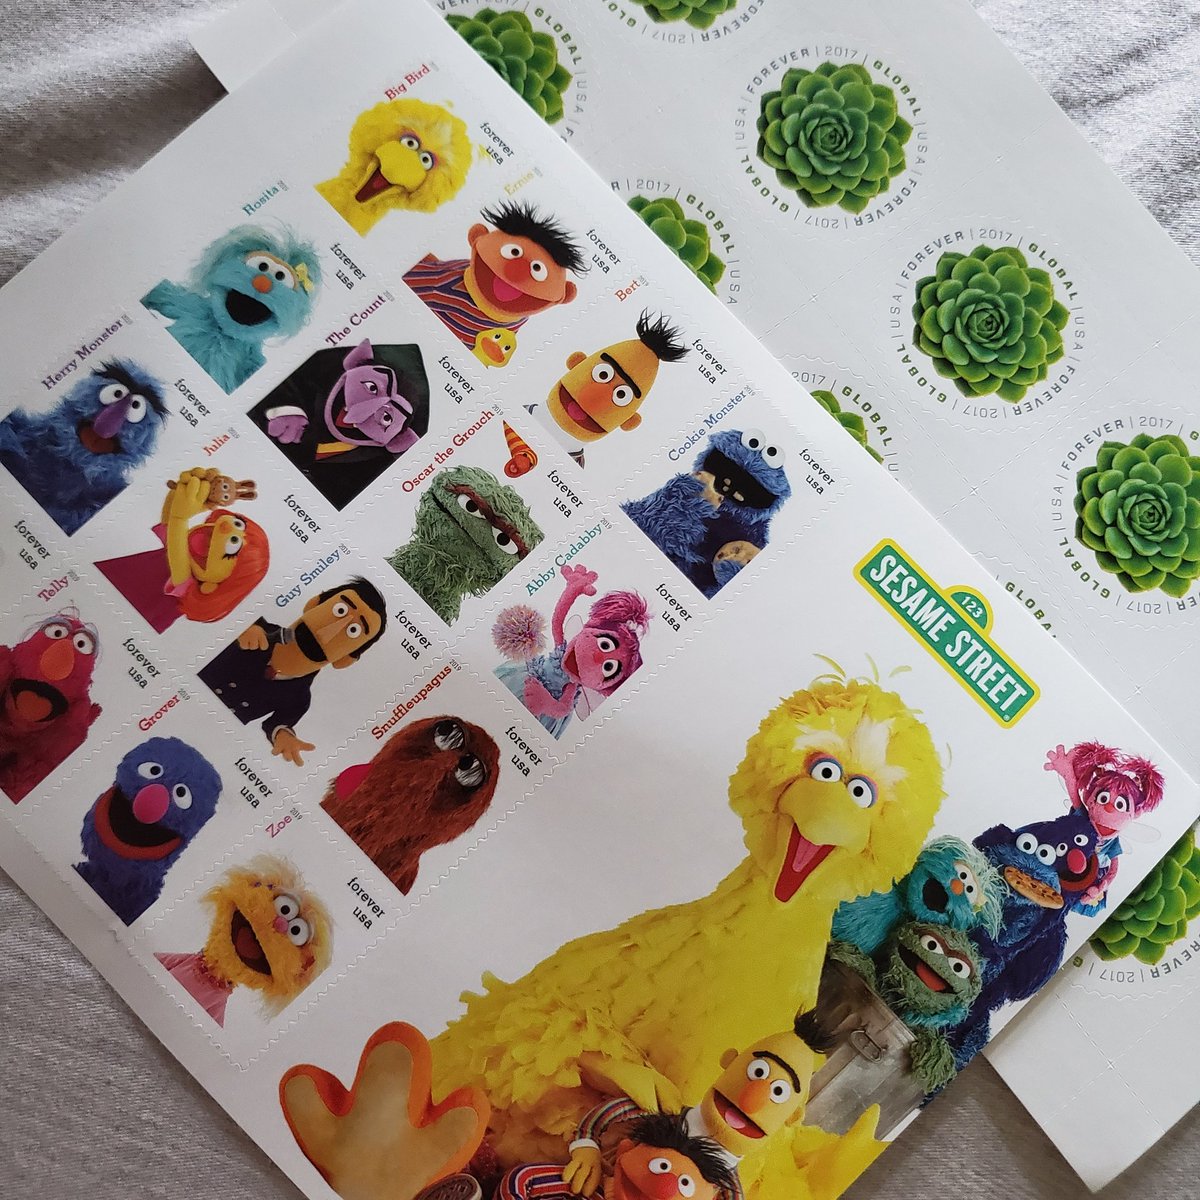 New stamps cause the letters are flying from Hawai'i to other states & countries #Penpal #LetterWriting  #TheArtOfLetterWriting #SesameStreet #GlobalStamps #PostalStamps #Stamps